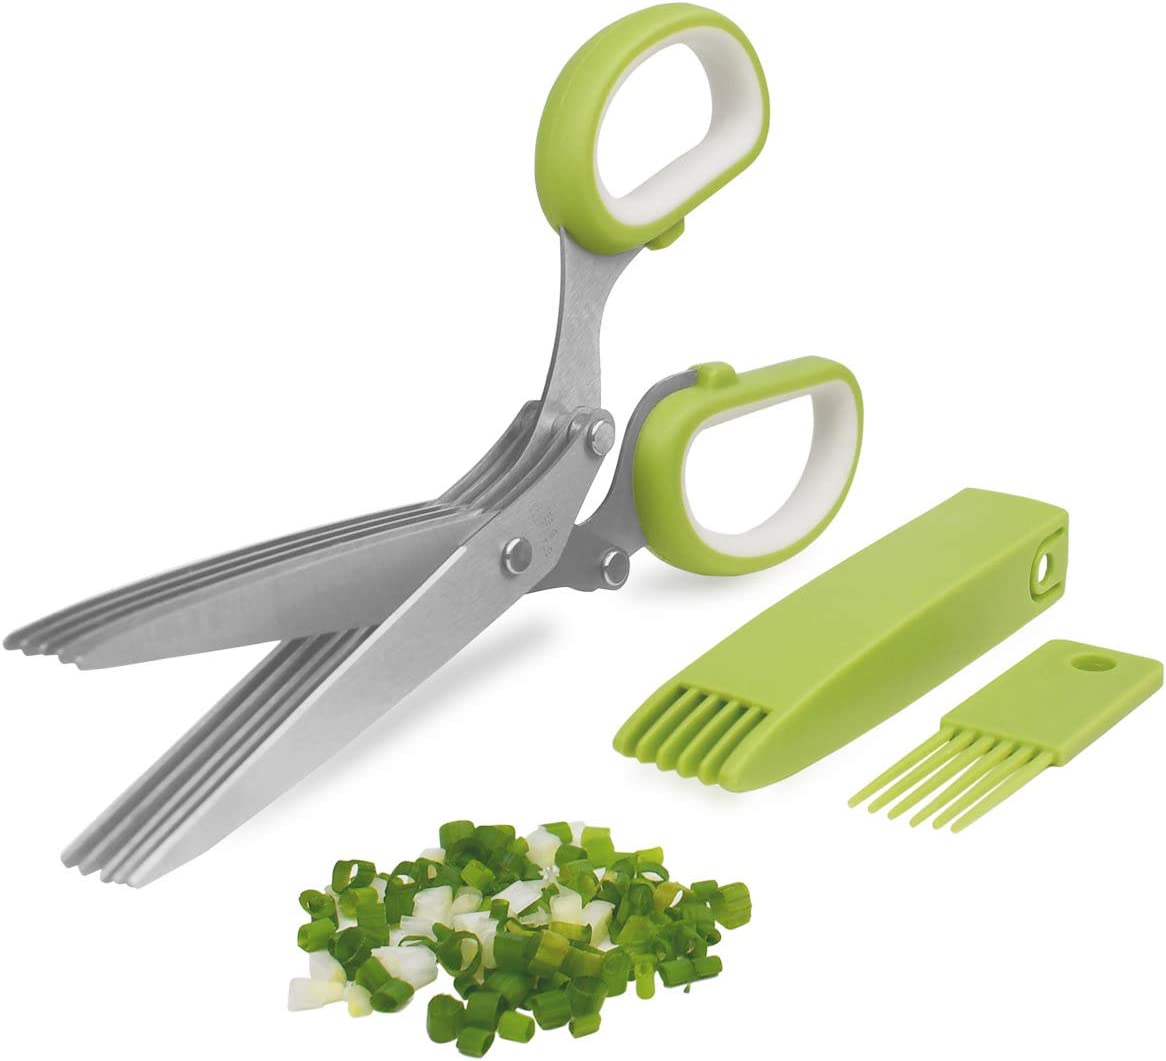 Herb Cutter Scissors 5 Blade Scissors Kitchen Multipurpose Cutting Shear with 5 Stainless Steel Blades & Safety Cover & Cleaning Comb Cilantro…